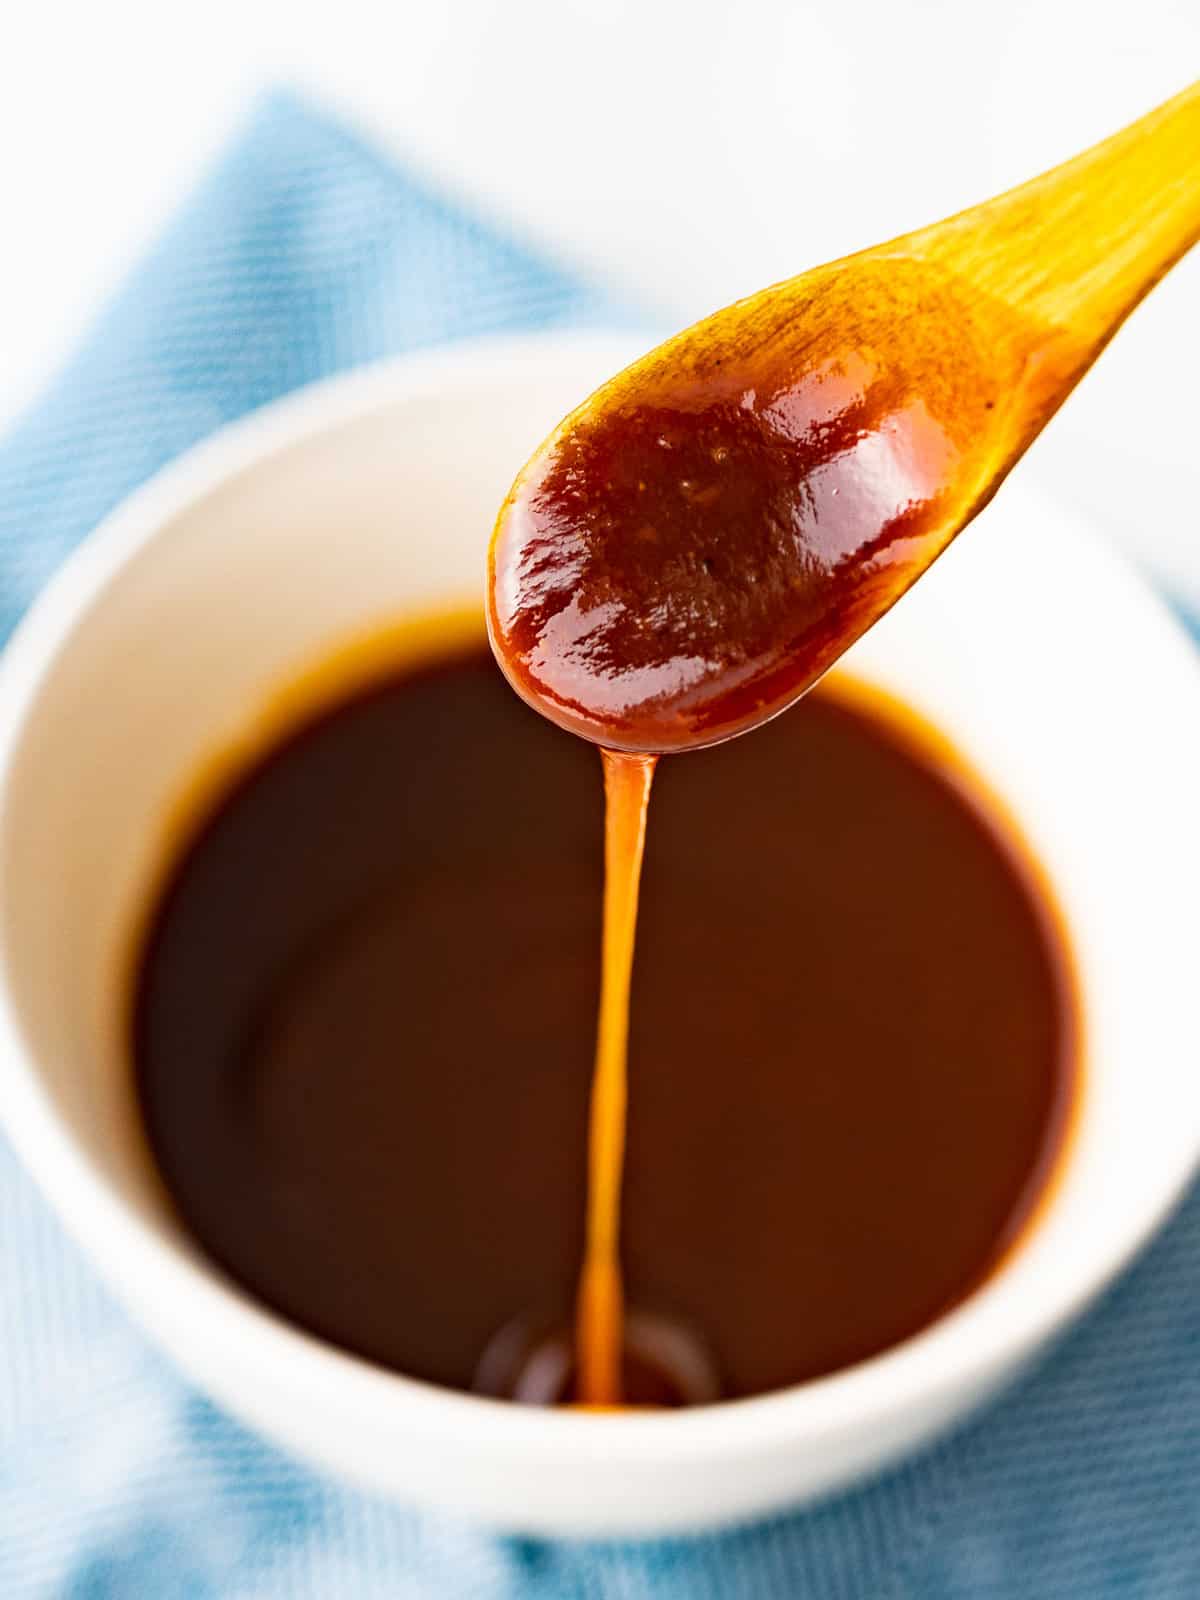 Katsu sauce inspired by bull-dog sauce flowing off a spoon.